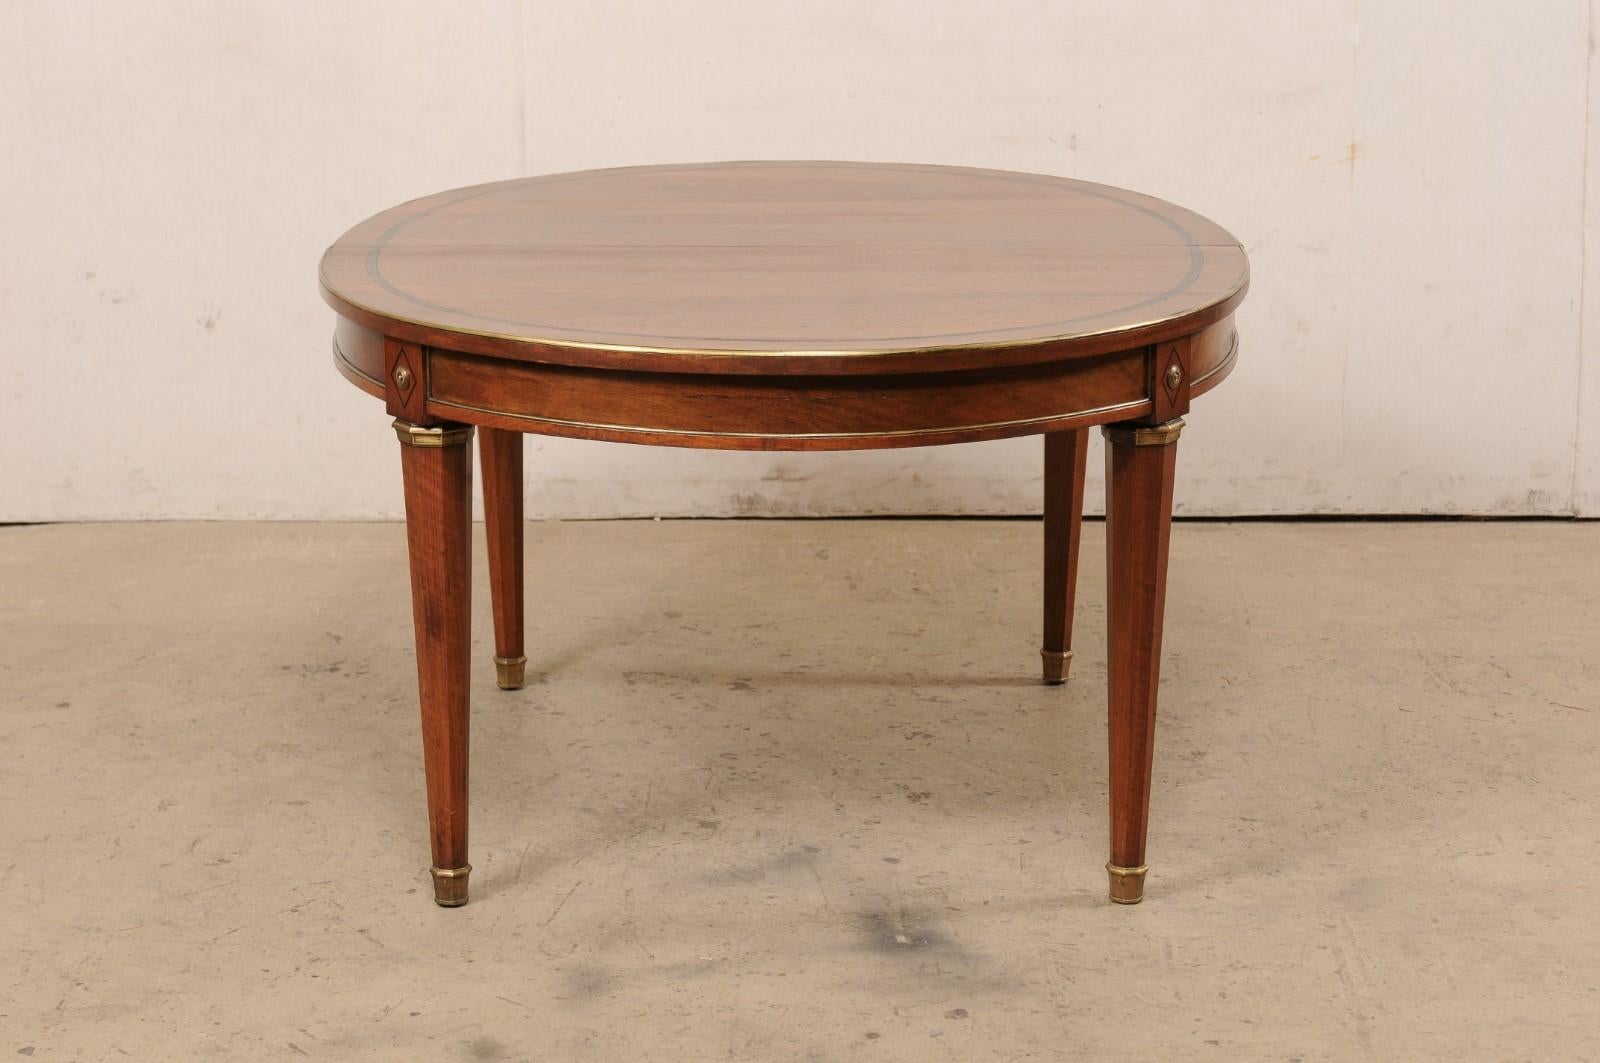 French Neoclassic Style Oval Table with Brass Trim & Accents '1 Leaf Extension' For Sale 3